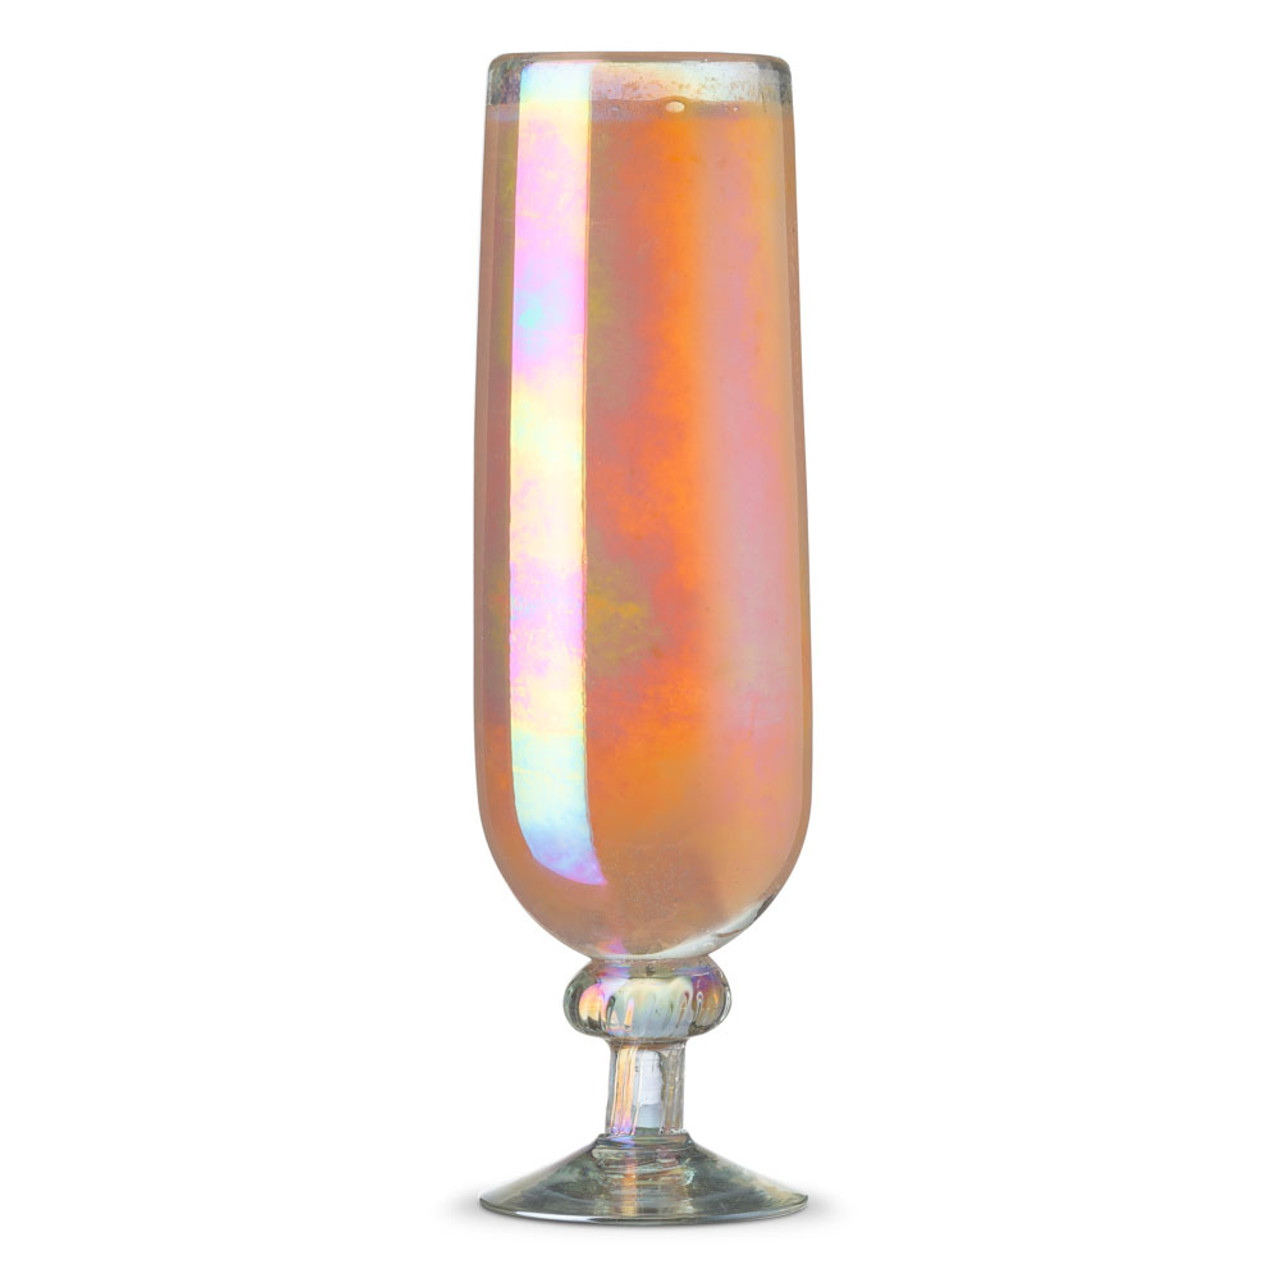 https://cdn11.bigcommerce.com/s-cznxq08r7/images/stencil/1280x1280/products/4775/13180/A10067-1-Hand-Blown-Fluted-Pearl-Champagne-and-Mimosa-Glasses-6-oz-Set-of-2-2__80151.1612823327.jpg?c=1